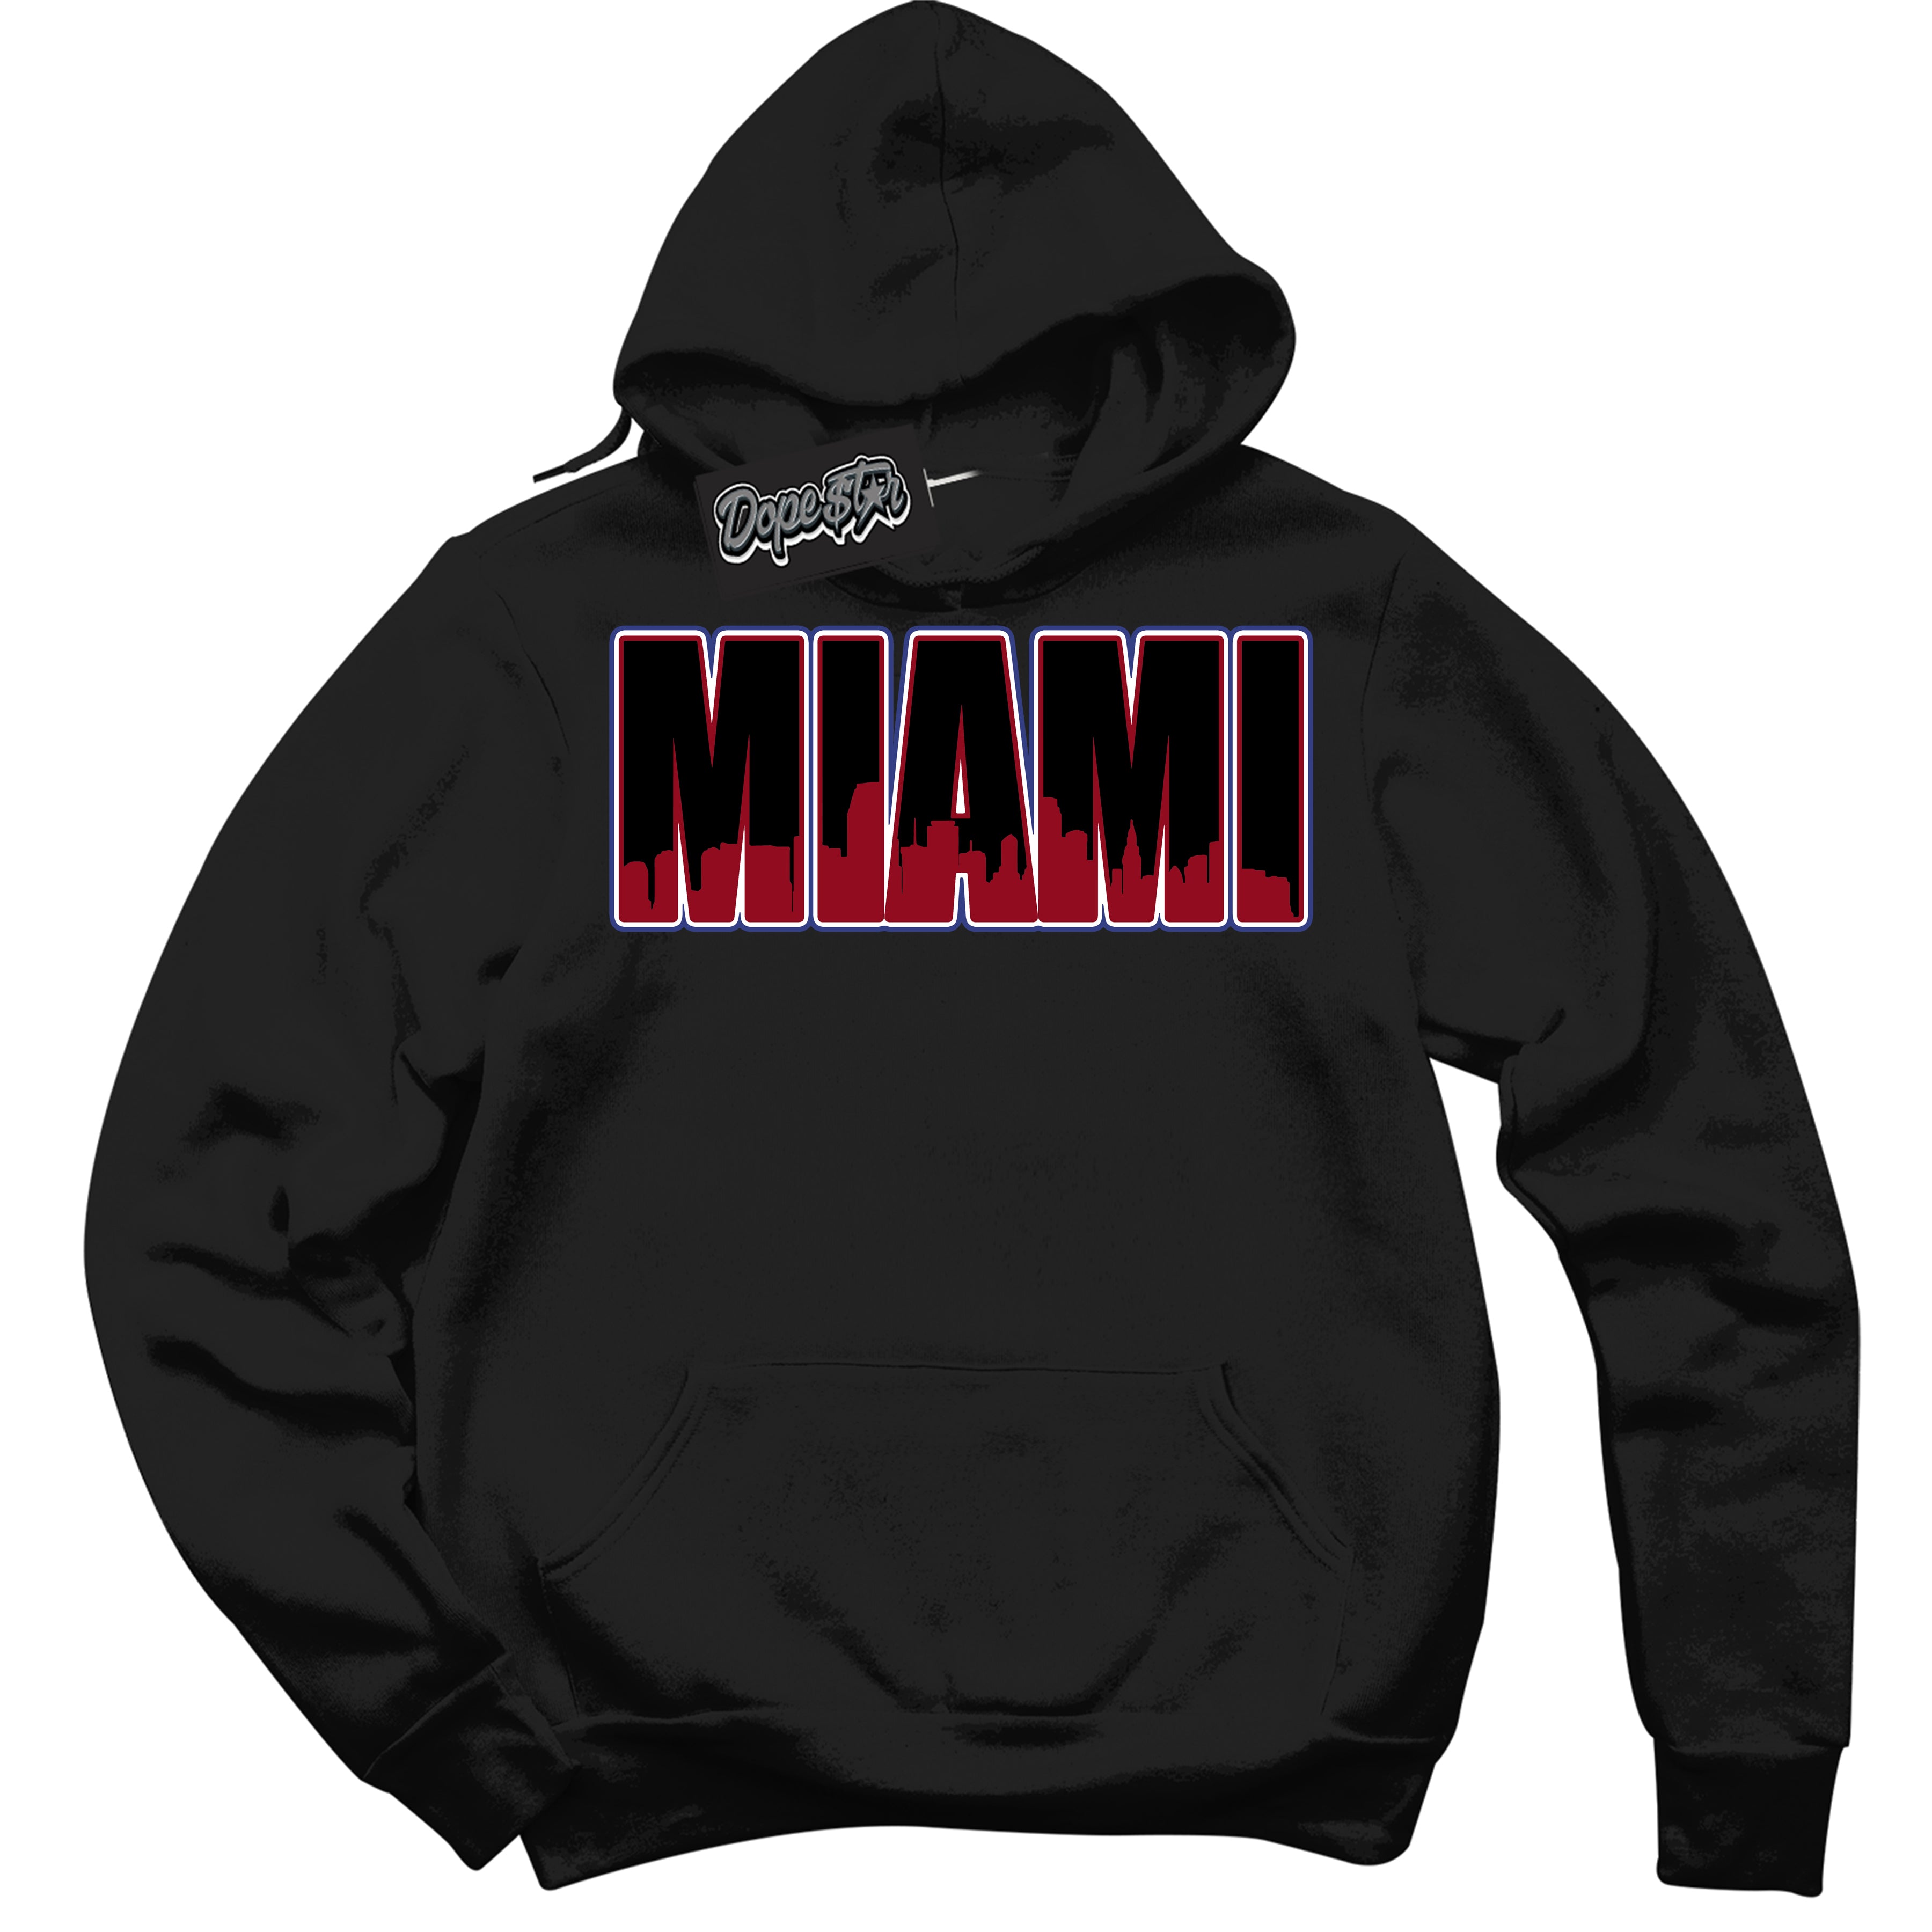 Cool Black Hoodie with “ Miami ”  design that Perfectly Matches Playoffs 8s Sneakers.